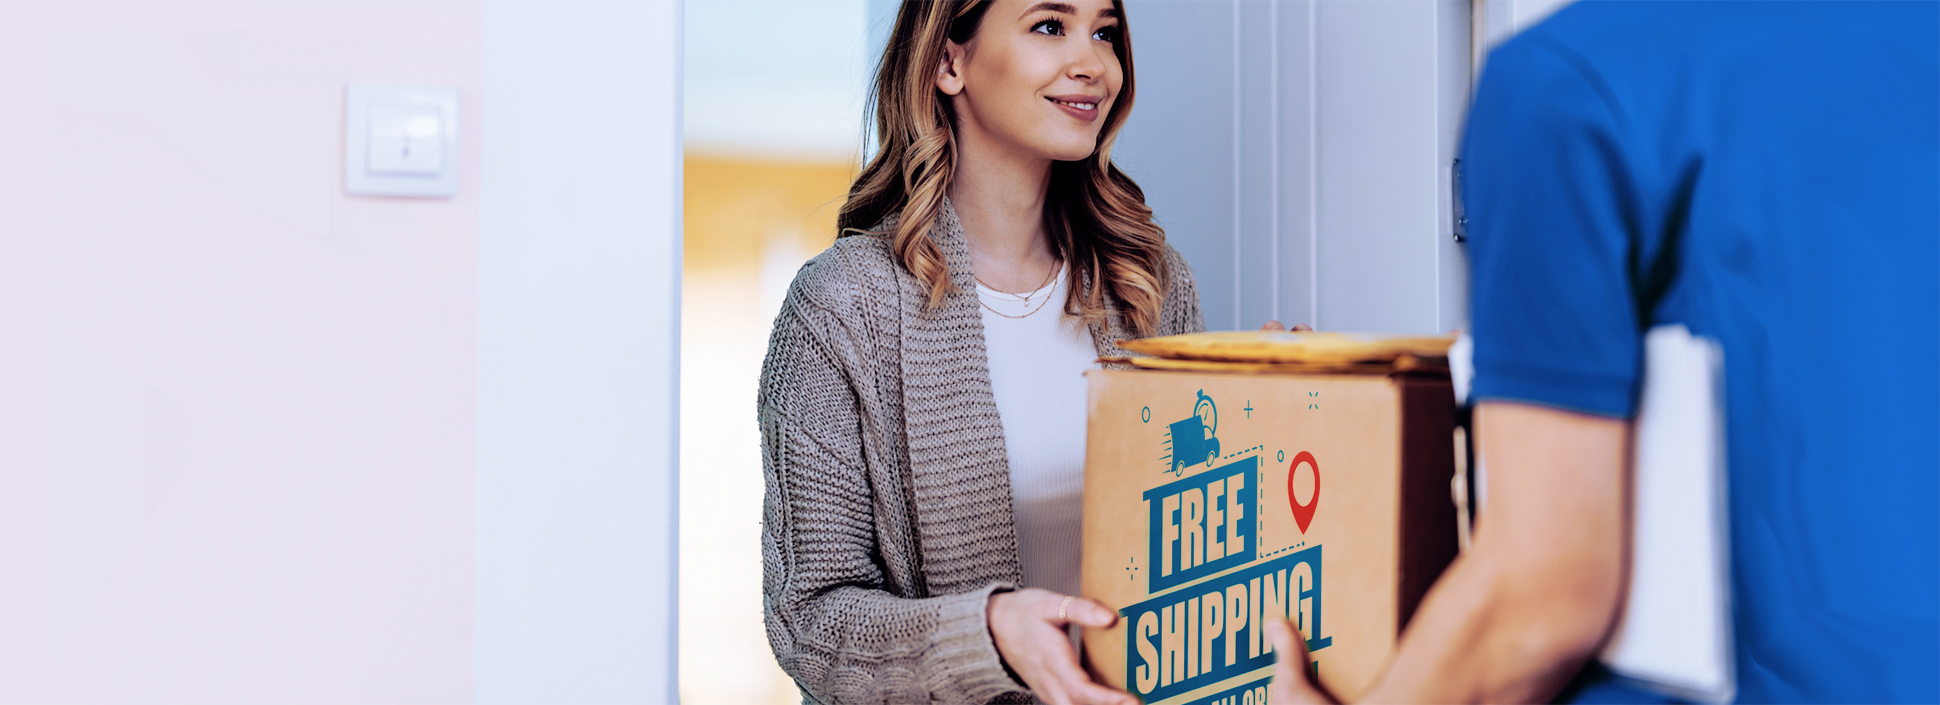 40+ Stores That Have Free Shipping for Online Purchases